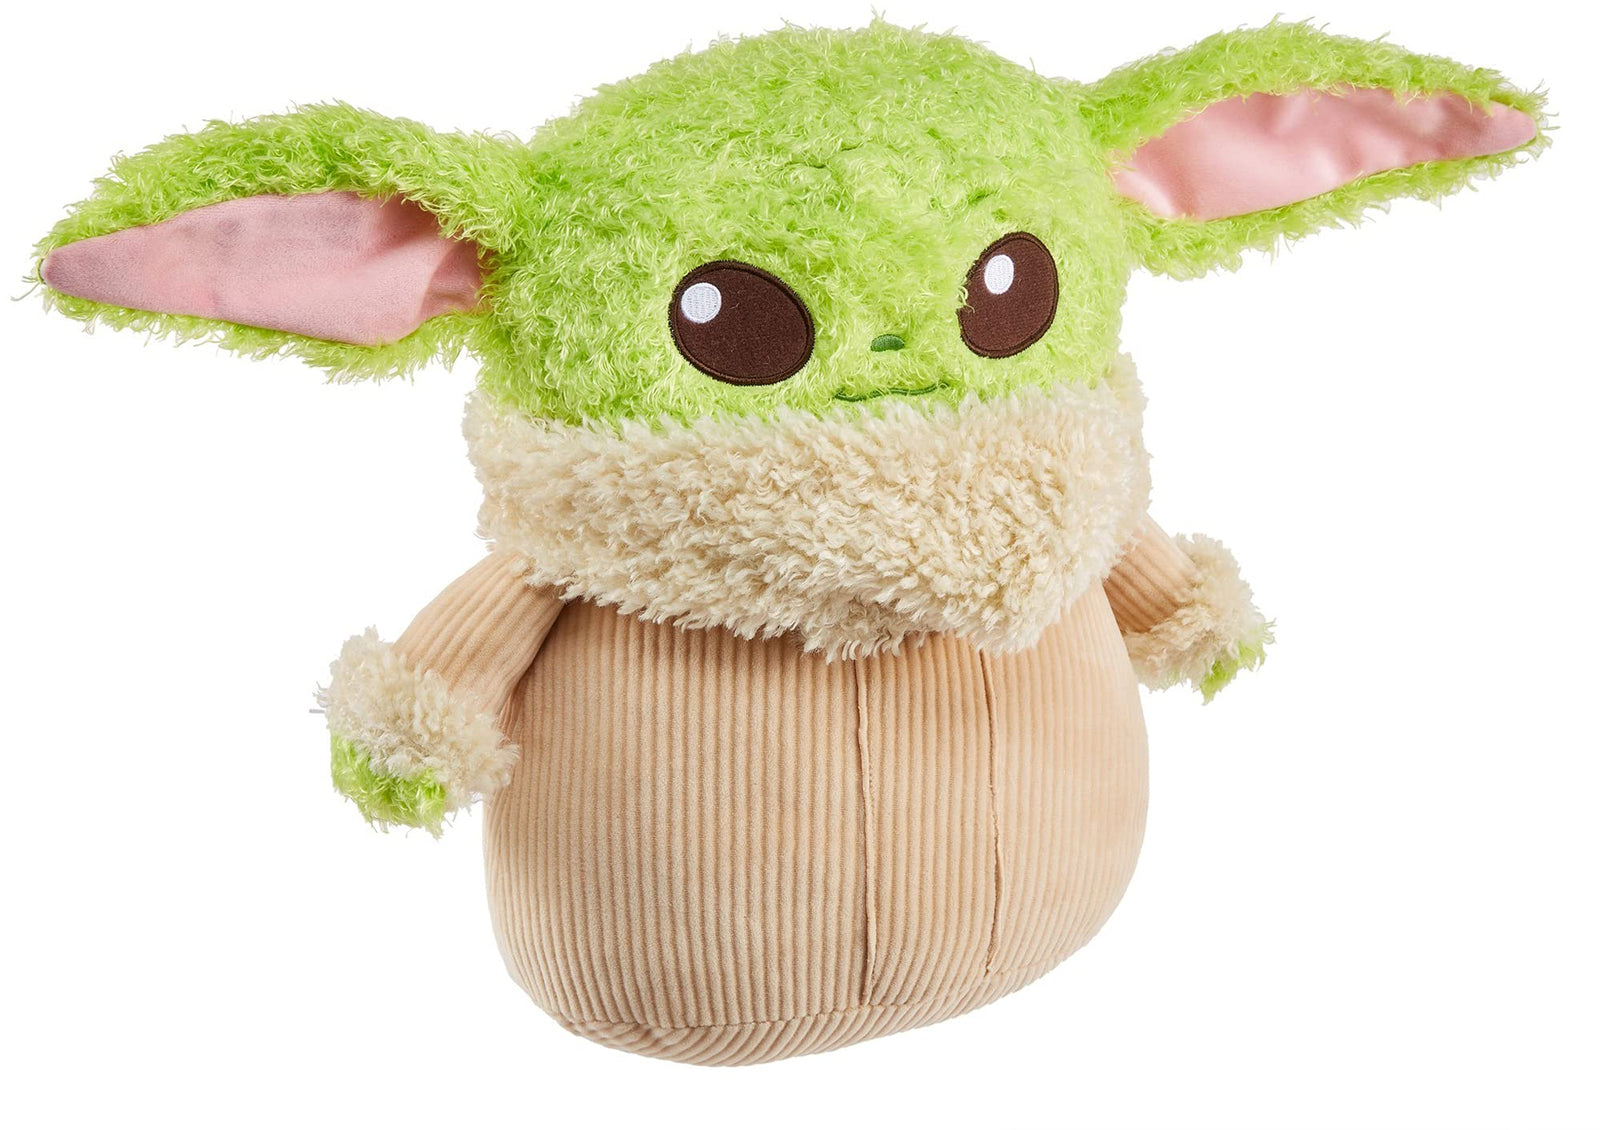 Star Wars Grogu Soft ‘N Fuzzy Plush, Fan Favorite Character, Push Hand & It Makes Noises, Collectible Gift for Fans, Collectors & Kids 3 Years & Up [Amazon Exclusive]